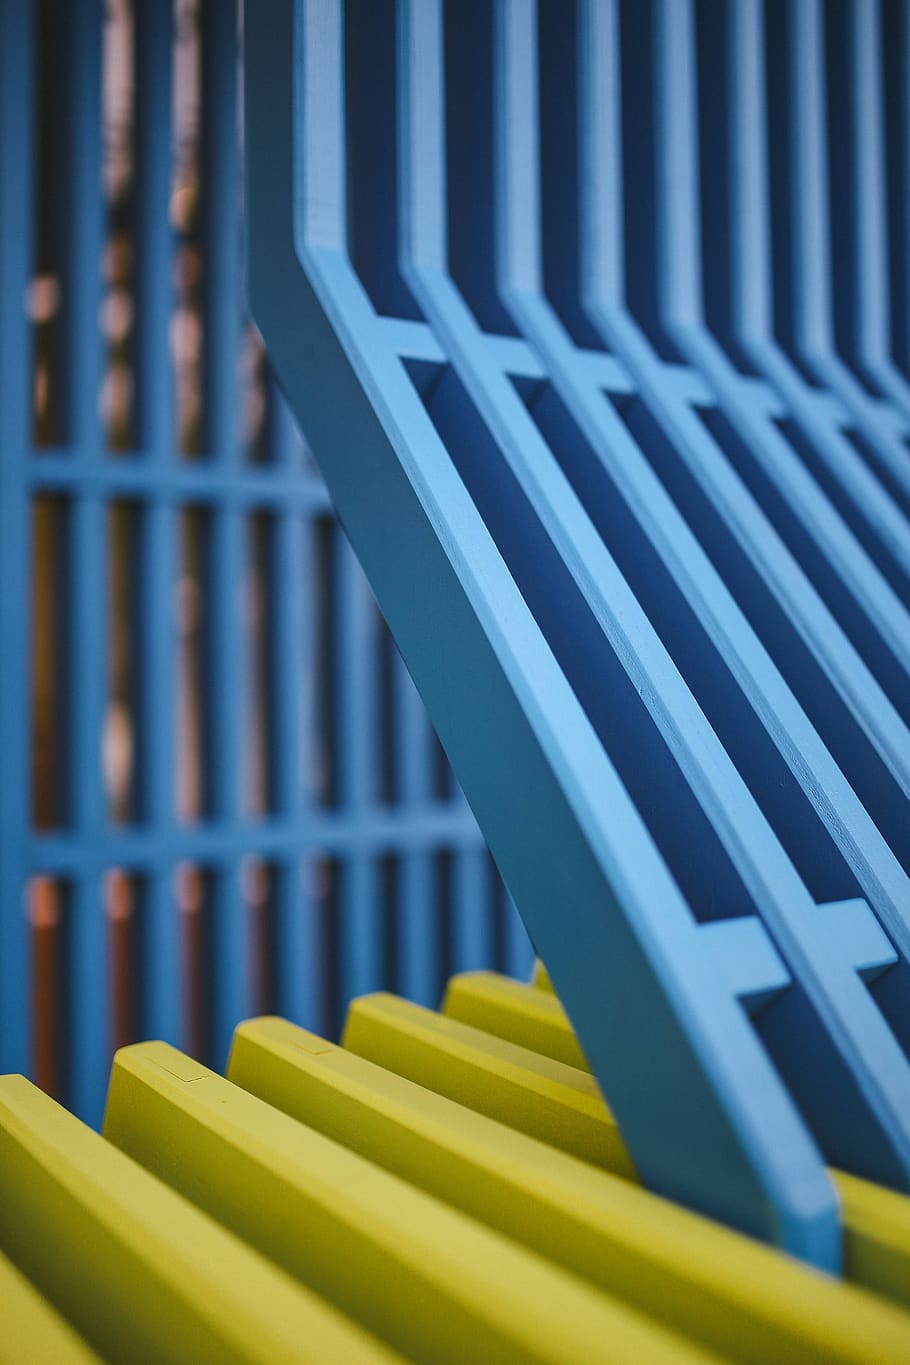 fence, wooden, wood, bars, colour, construction, Colourful, sand, blue, close-up